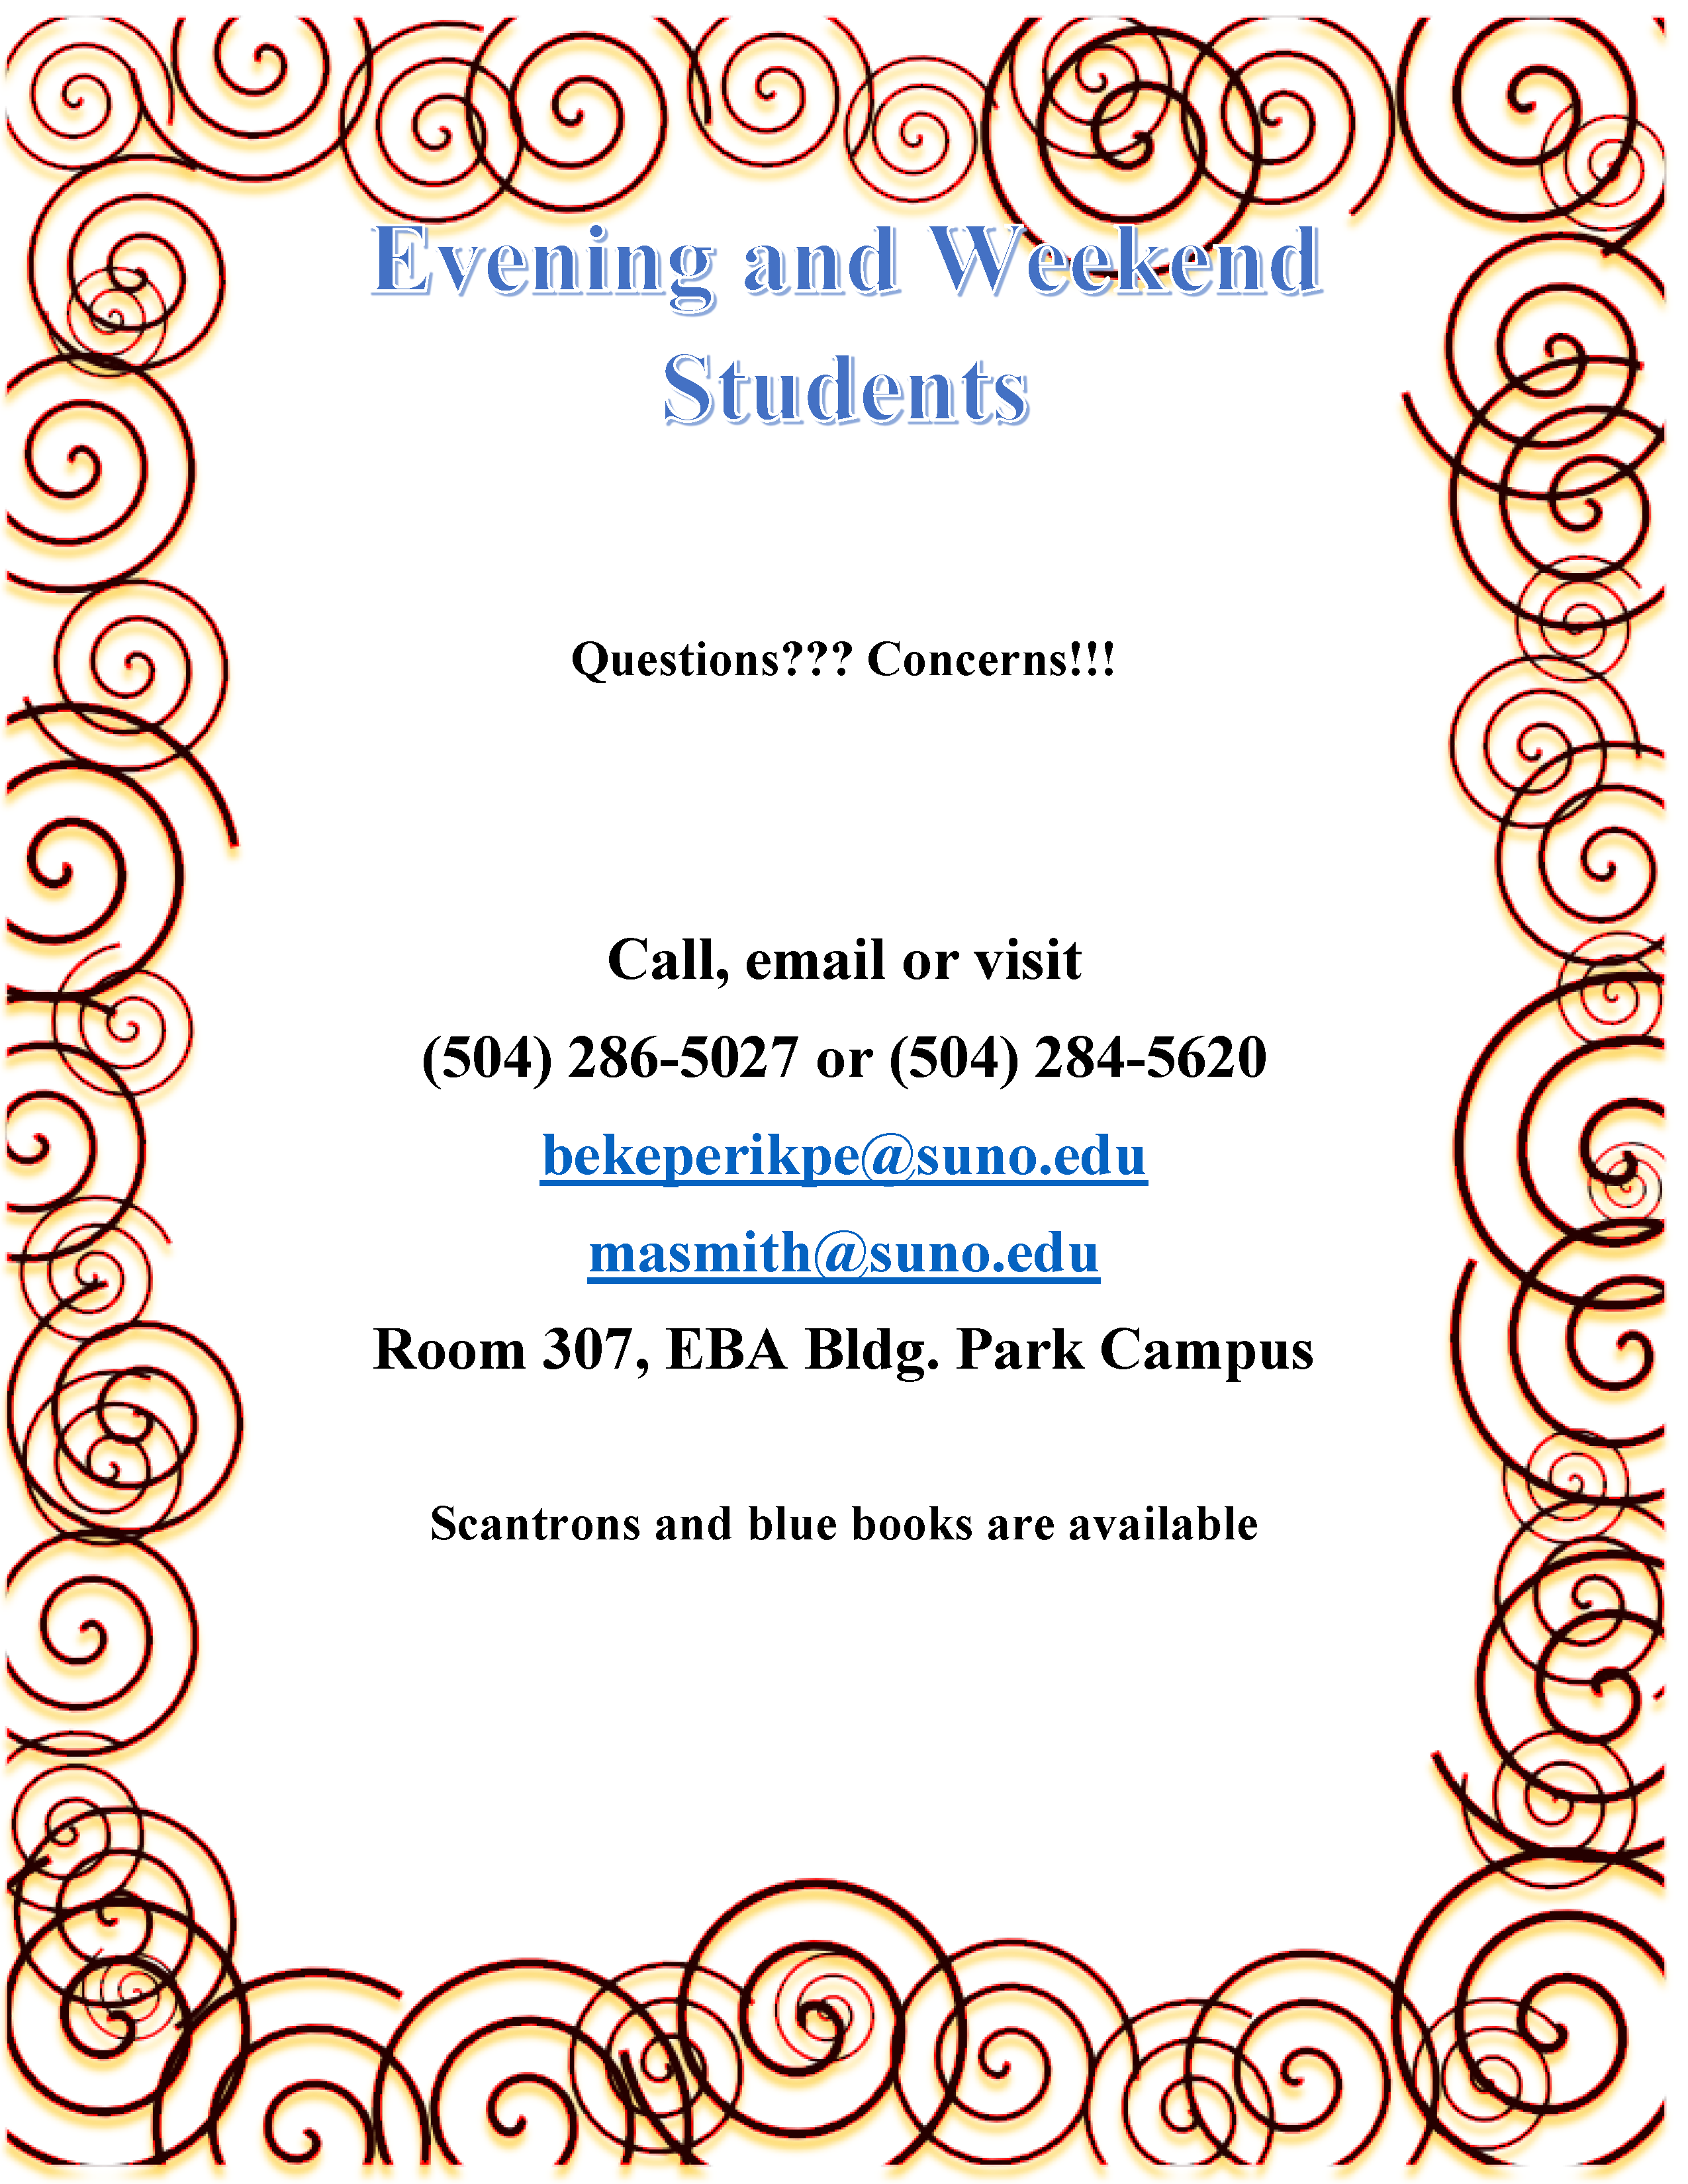 Evening and Weekend Students Concerns Flyer